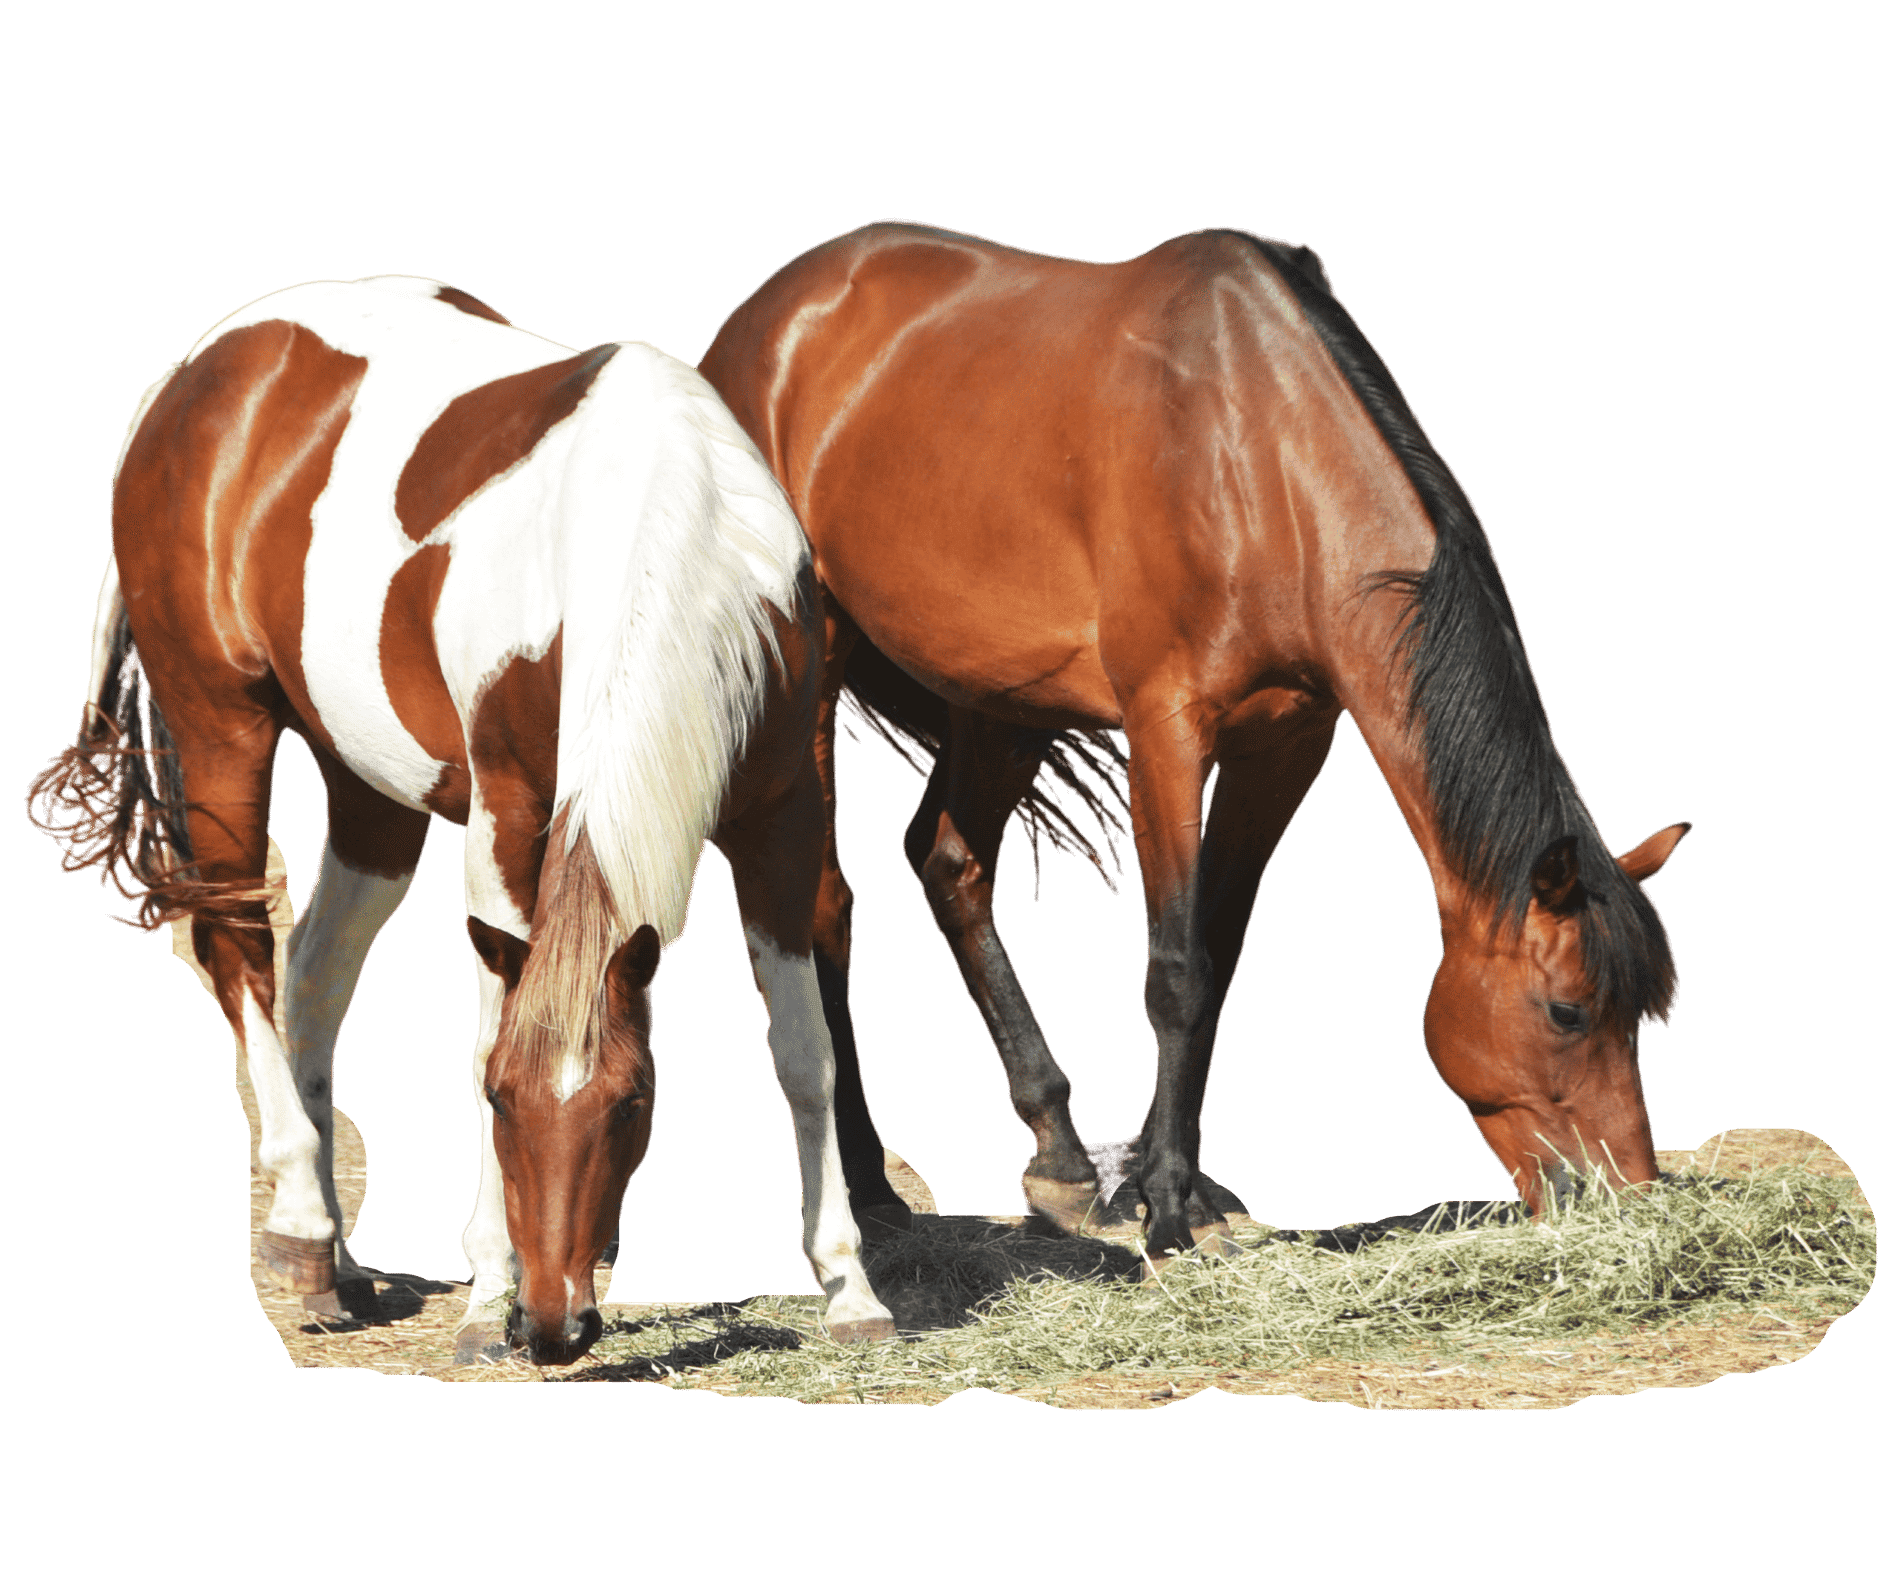 Horse nutrition